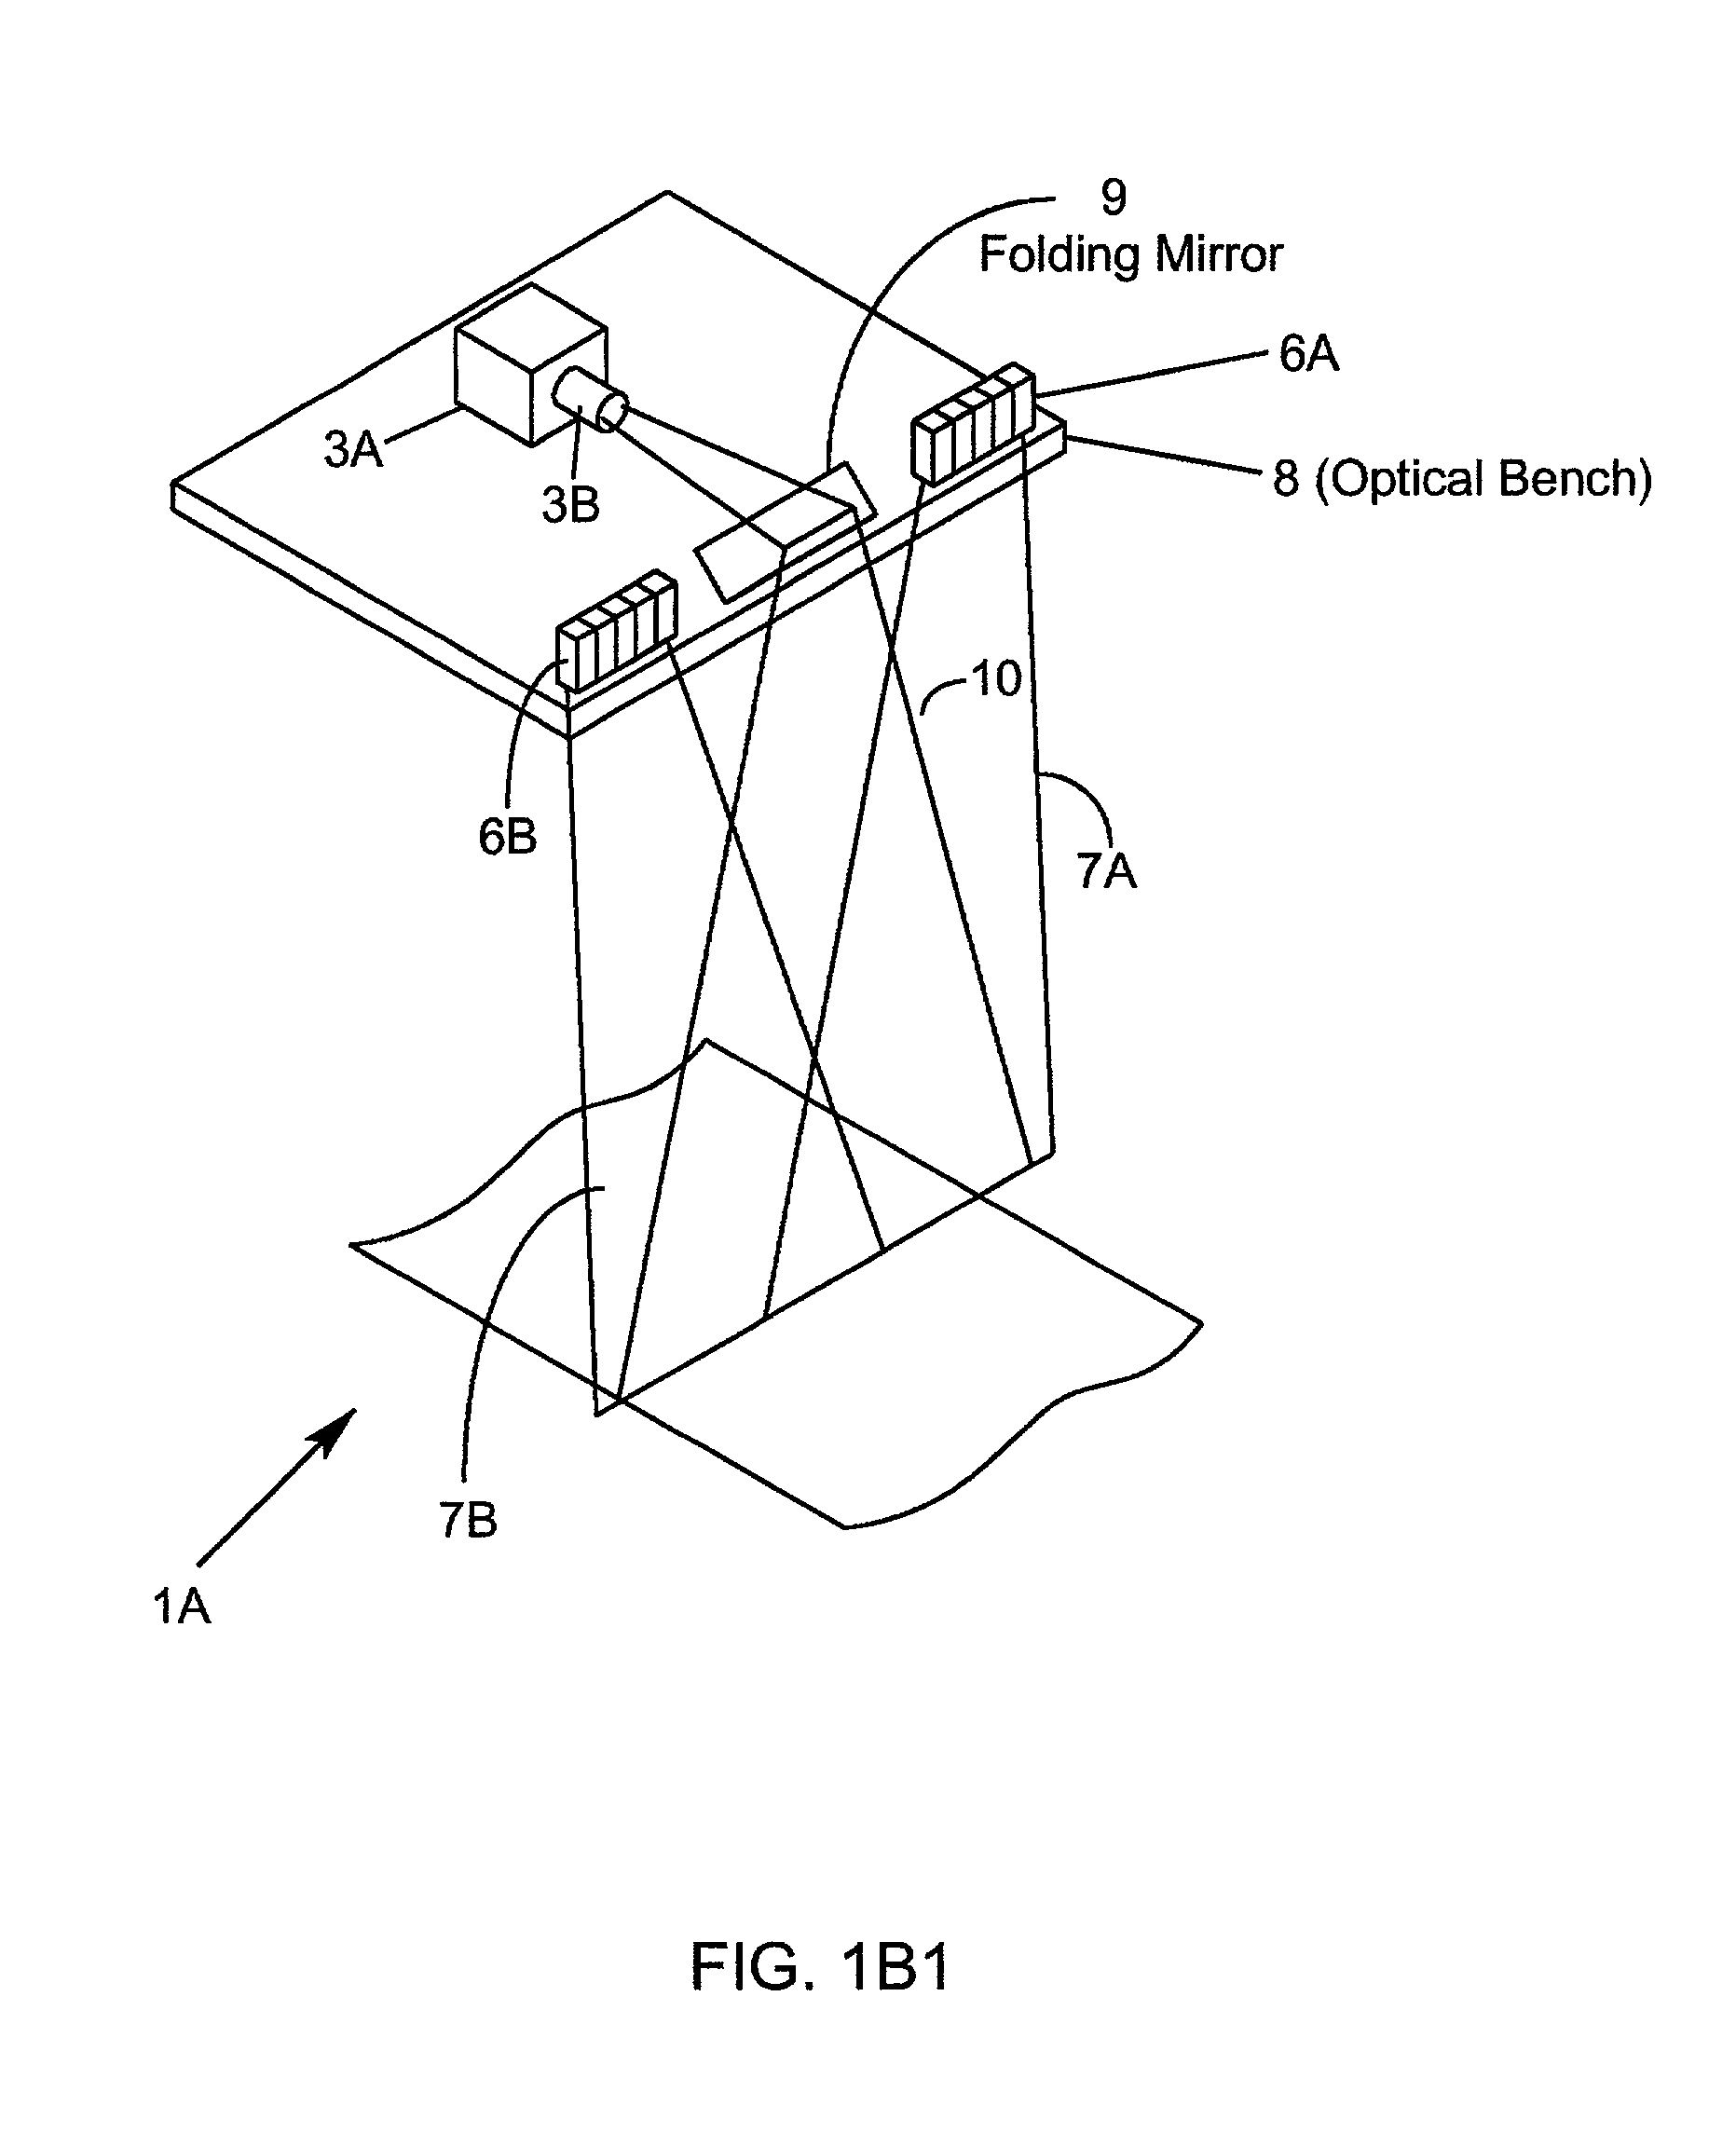 Method of extending the working distance of a planar laser illumination and imaging system without increasing the output power of the visible laser diode (VLD) sources employed therein